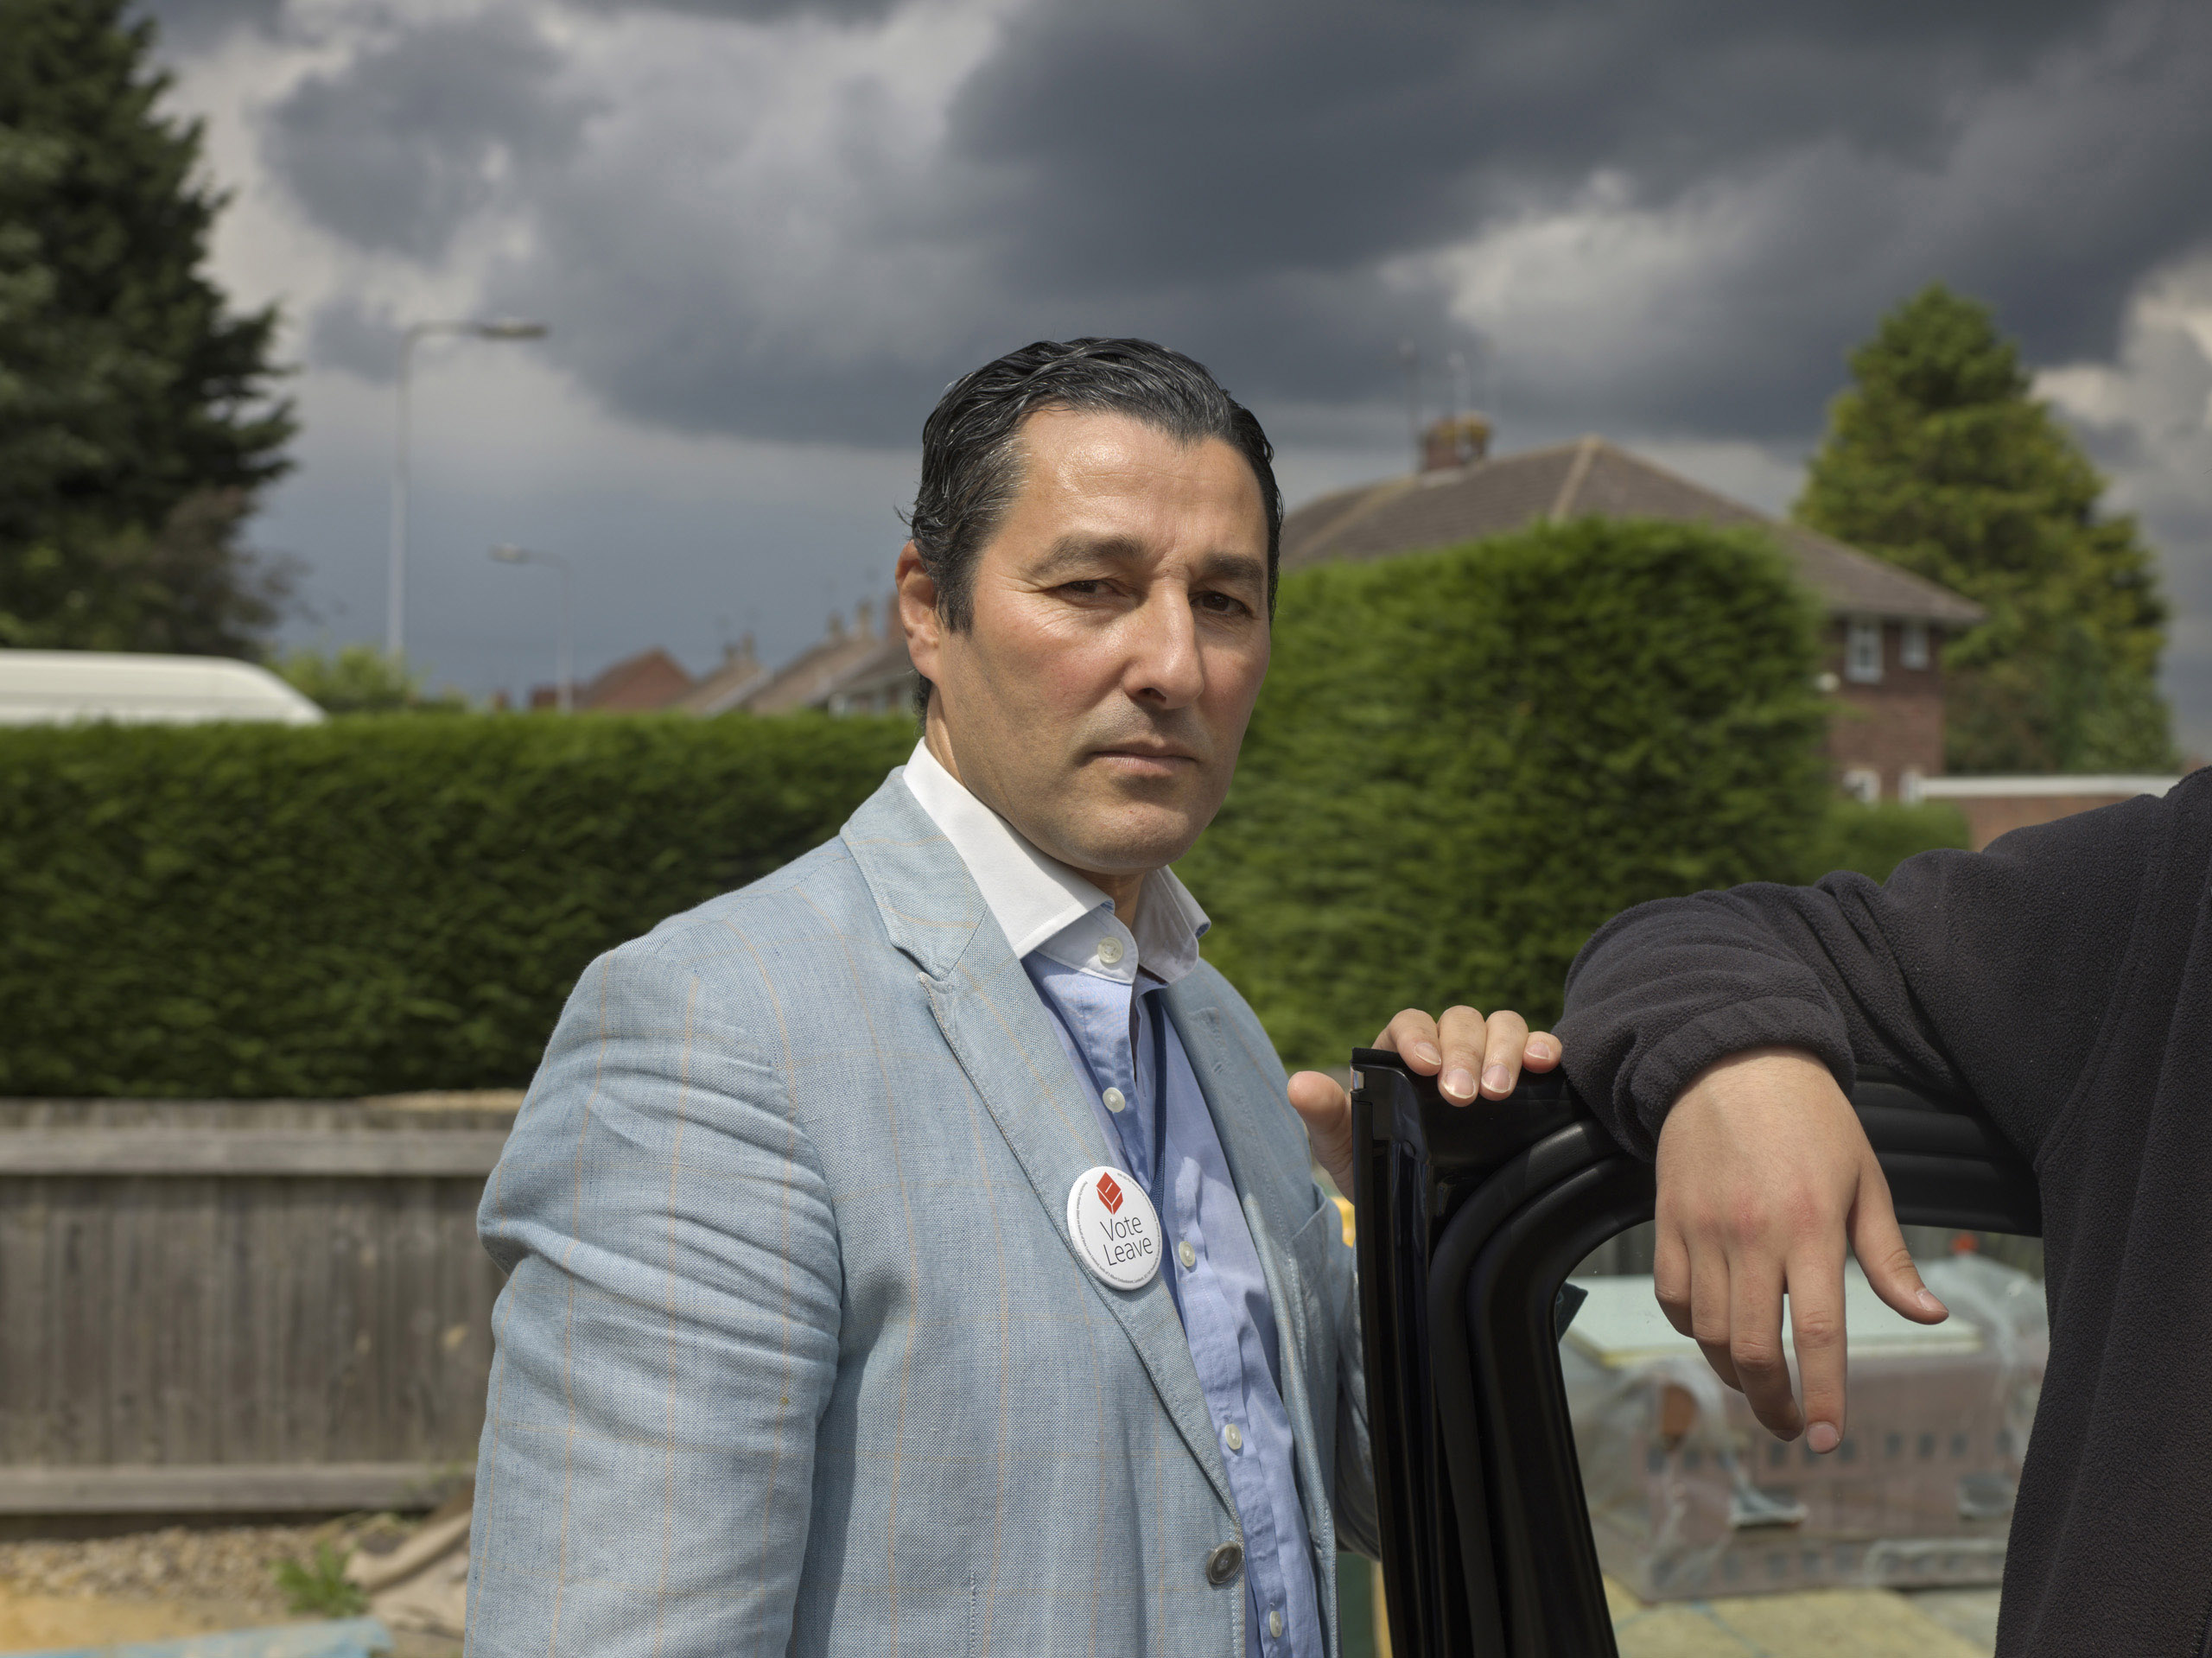 I supported Leave for a long time  said Borough Councilman Anton Dani, age 50, born in Morocco but has lived in England for more than 20 years.  We want to control our borders and make our own rules. 
                              Boston, Lincolnshire, June 25, 2016.